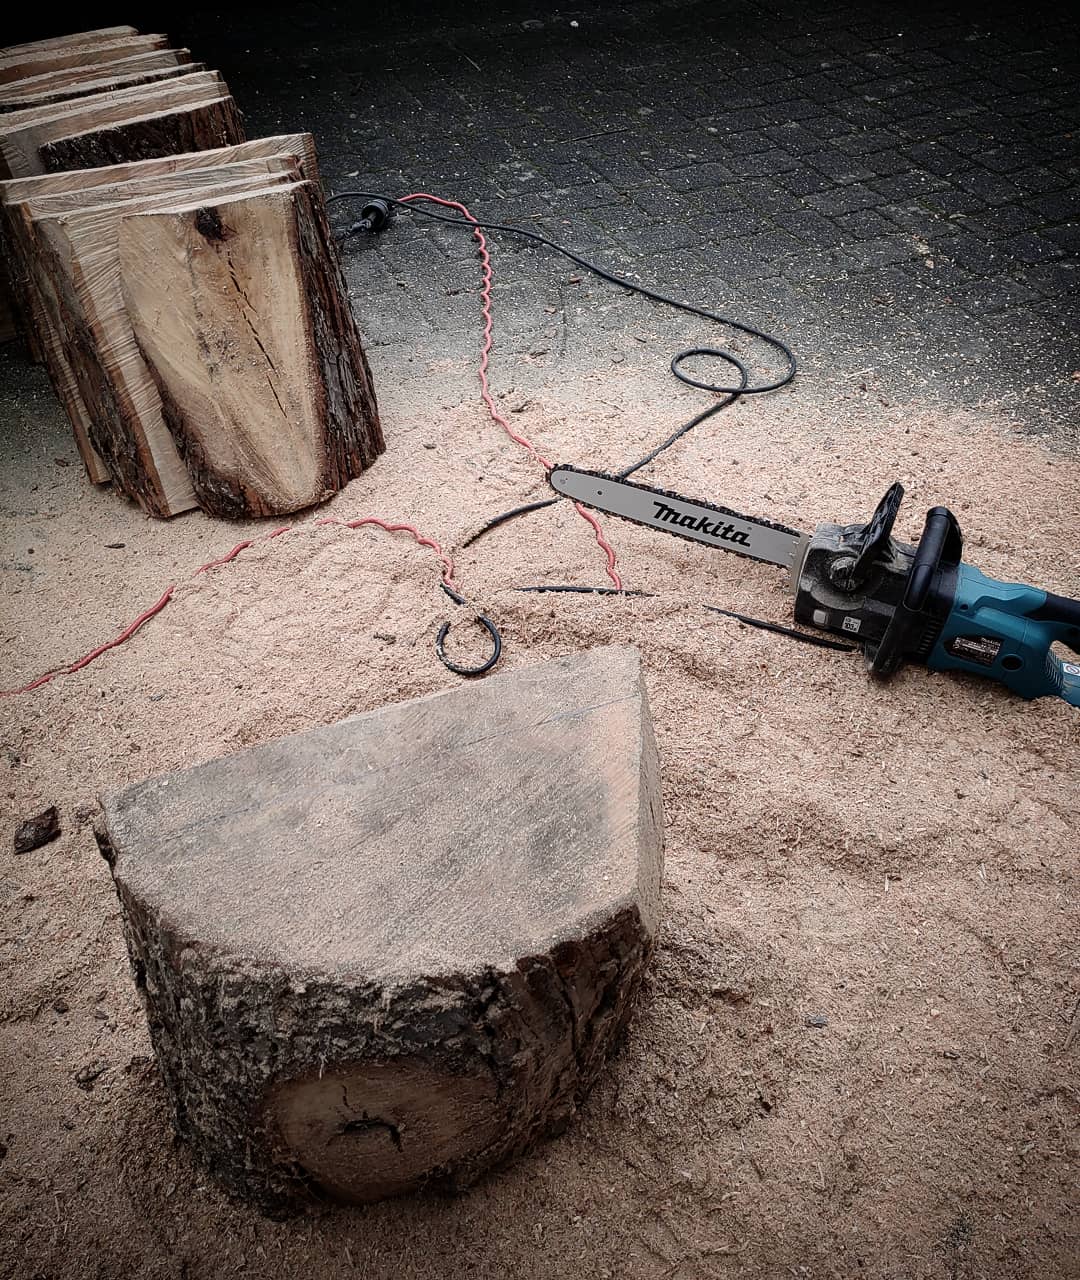 Preparing limewood with a chainsaw for Fabian Ewert's wall sculptures